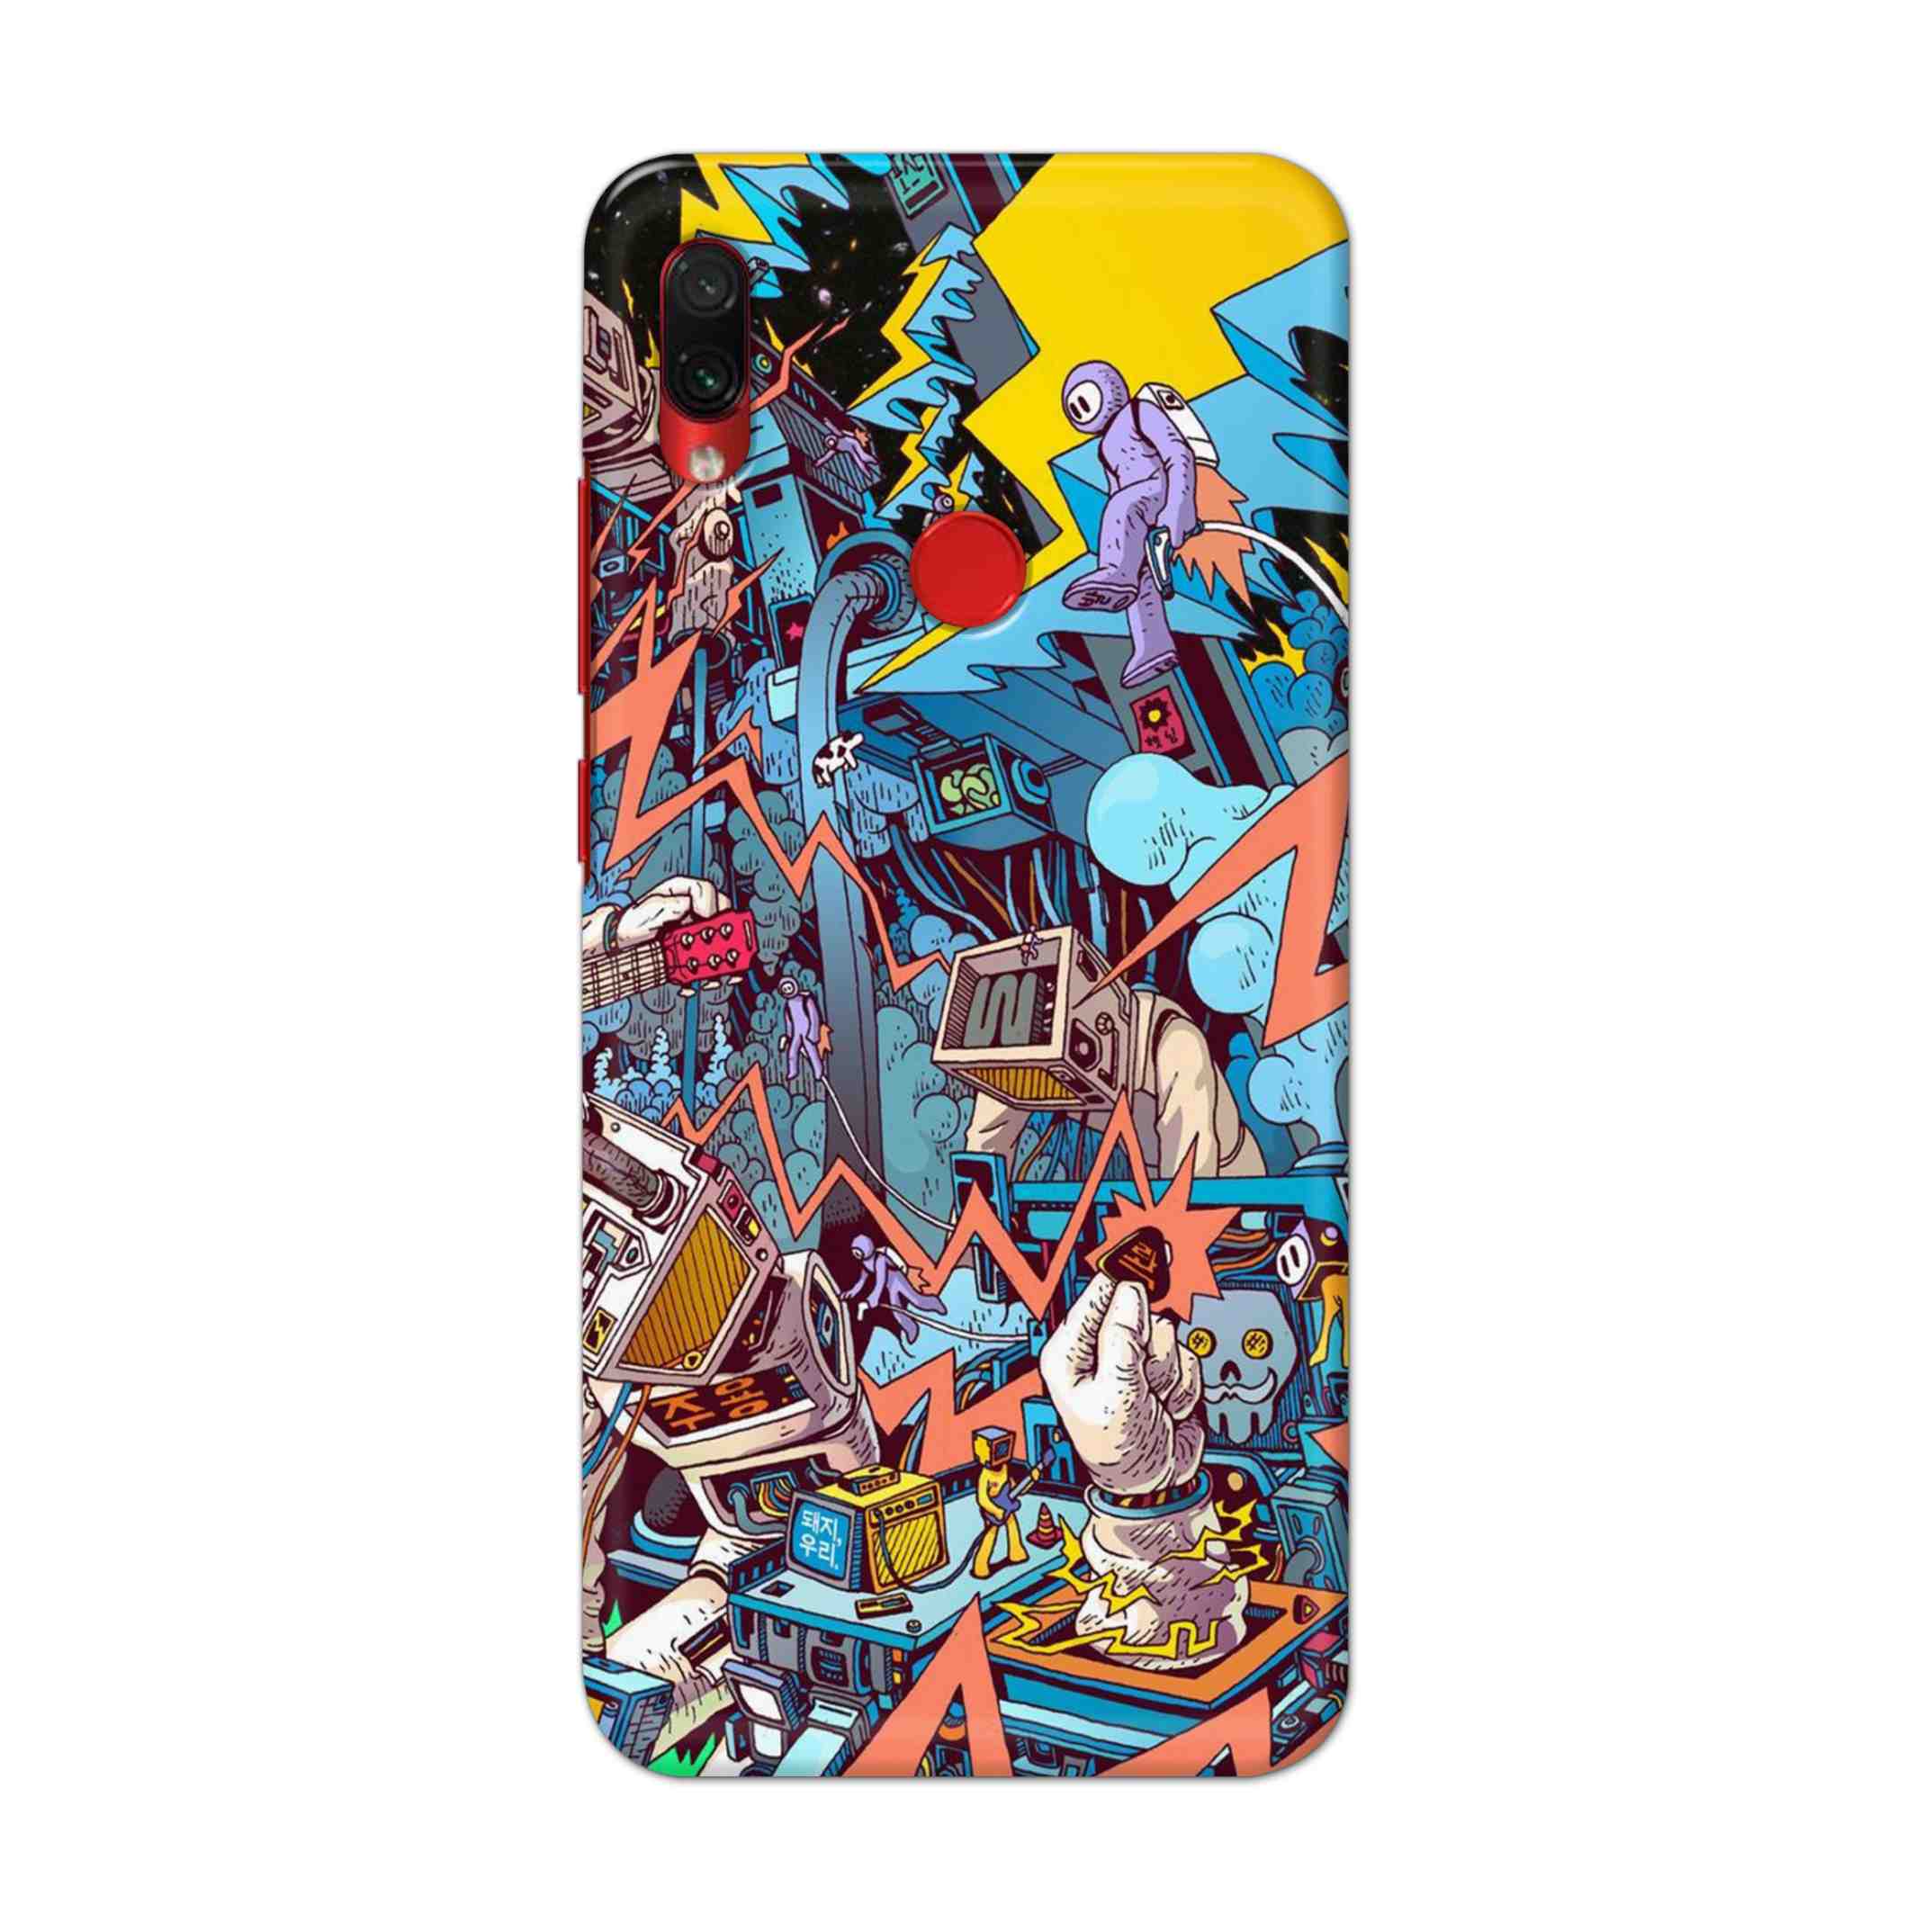 Buy Ofo Panic Hard Back Mobile Phone Case Cover For Xiaomi Redmi Note 7S Online